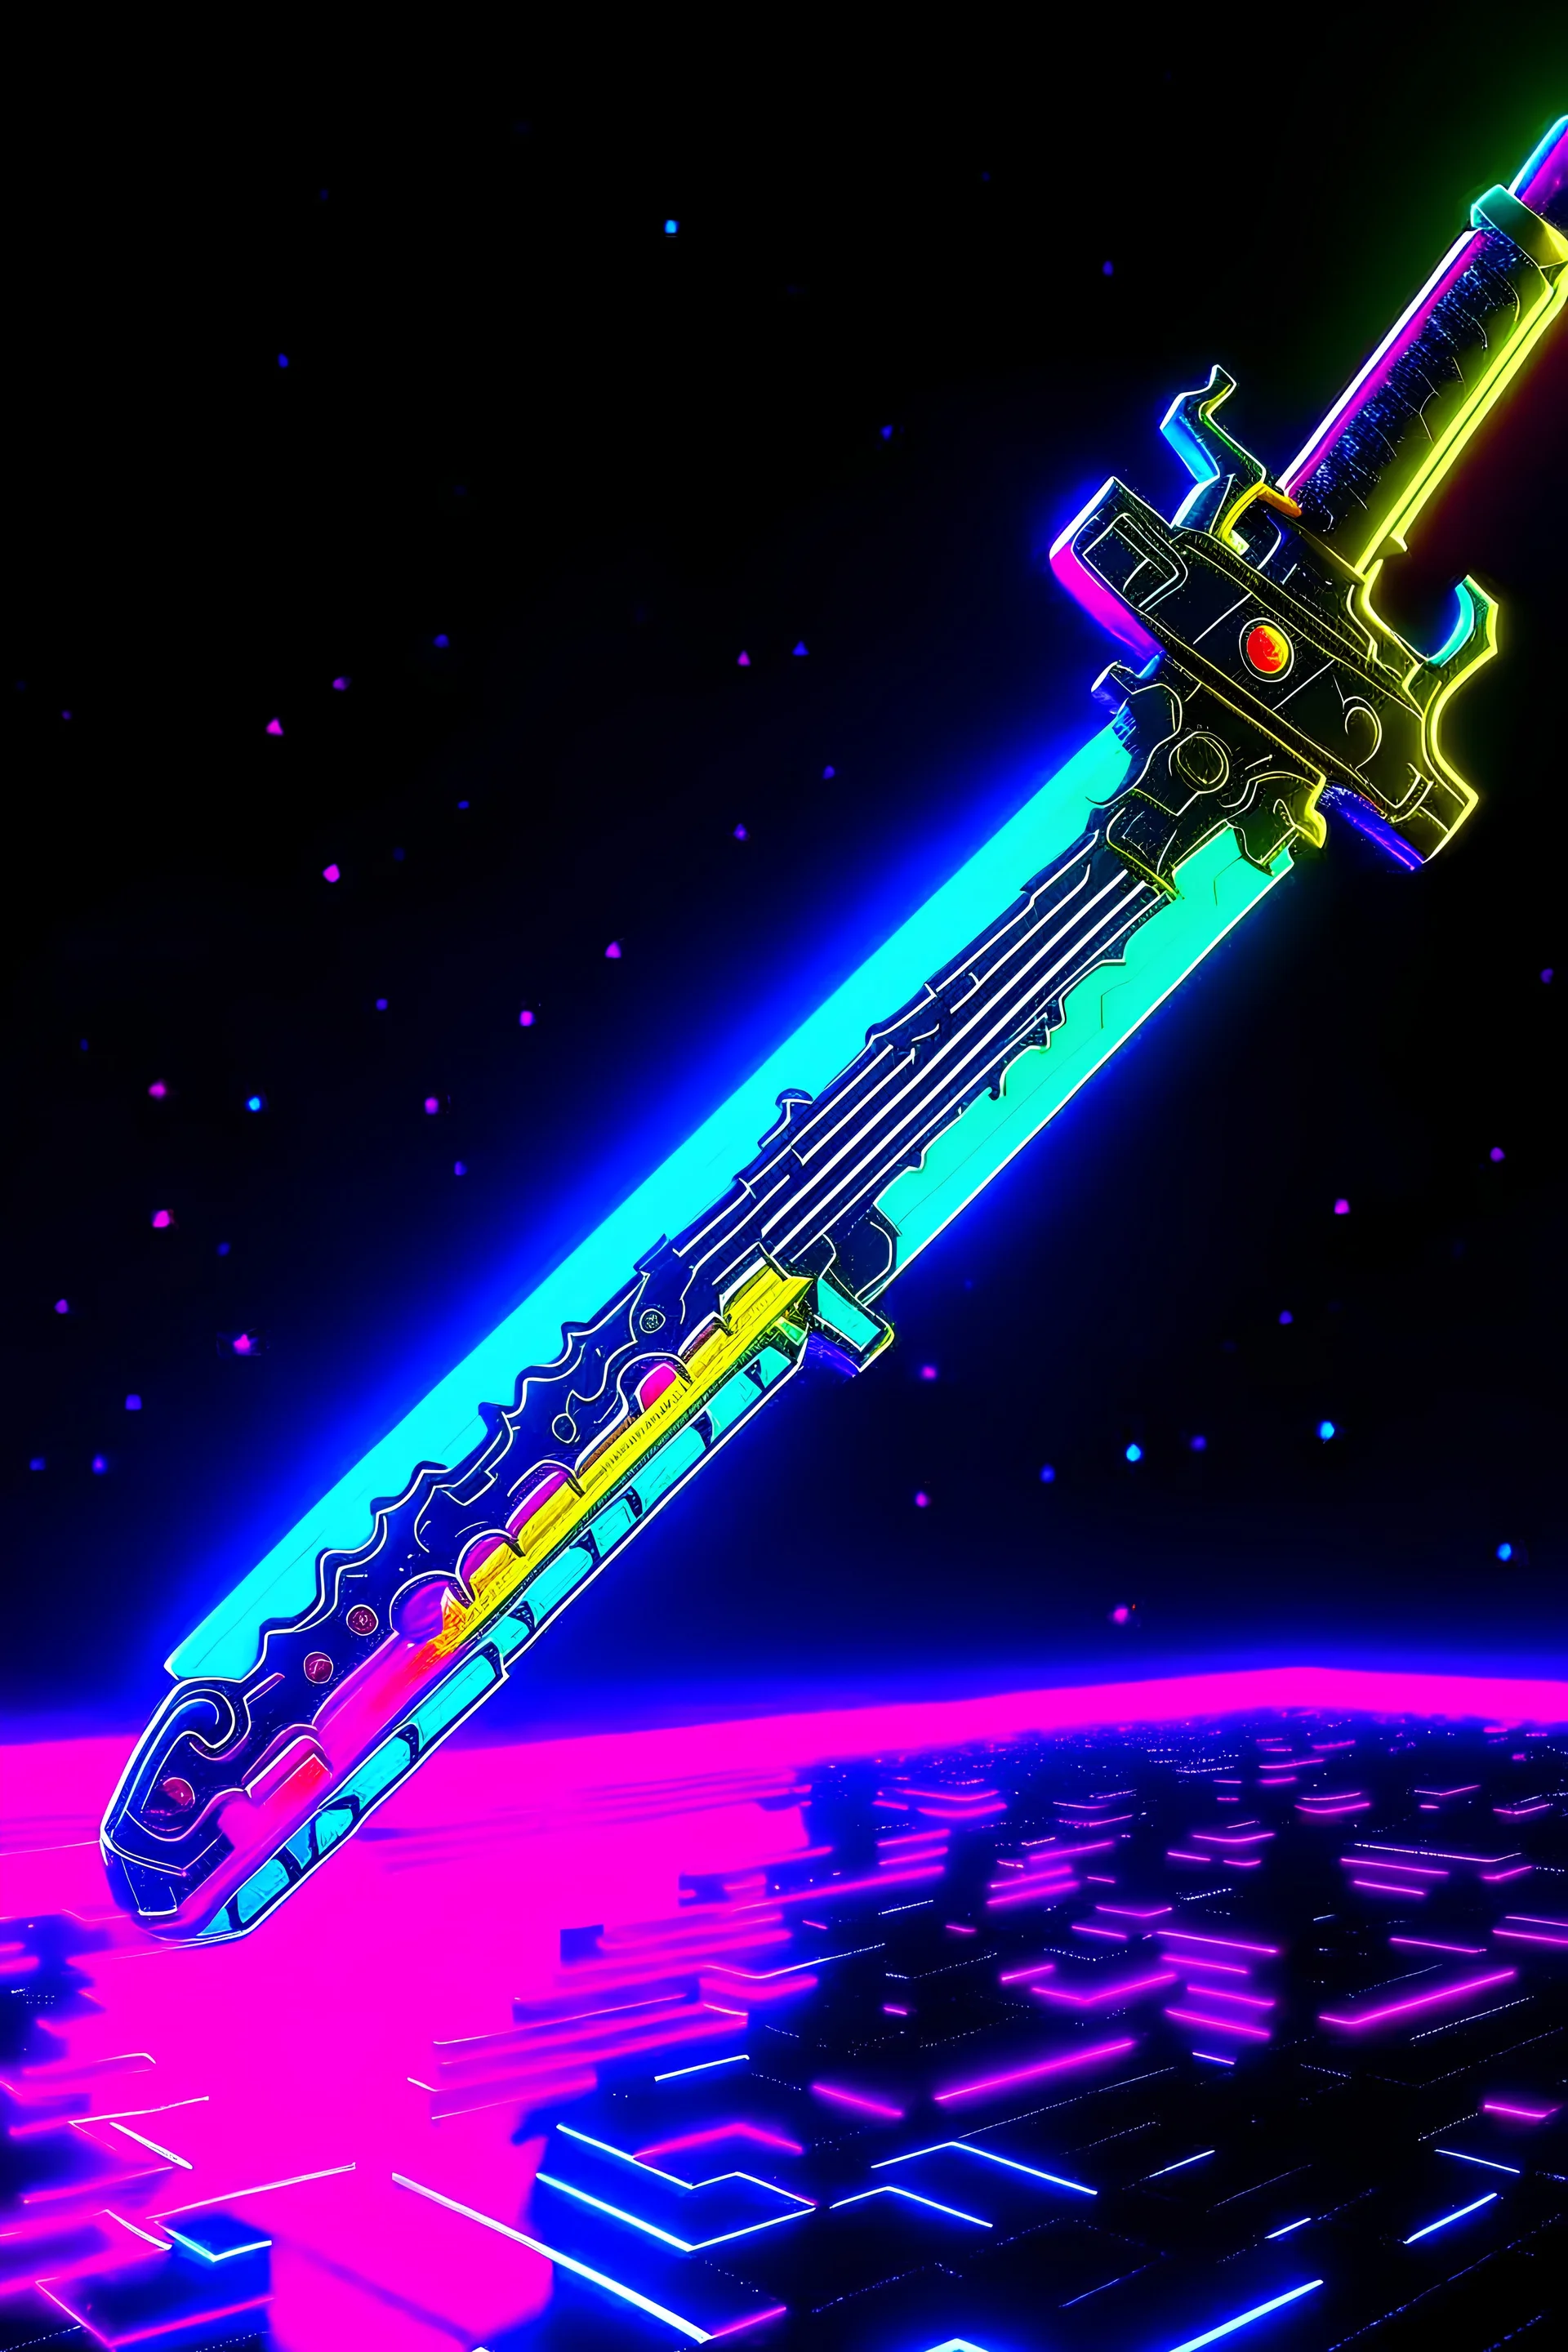 Create an AI-generated artwork of a futuristic, cyberpunk-inspired moomoo.io sword with a sleek and menacing design. Incorporate neon lights, metallic textures, and intricate patterns to make it look both high-tech and lethal. Think of how this sword would fit into a dystopian, technological world where it's a prized weapon of choice for skilled players."